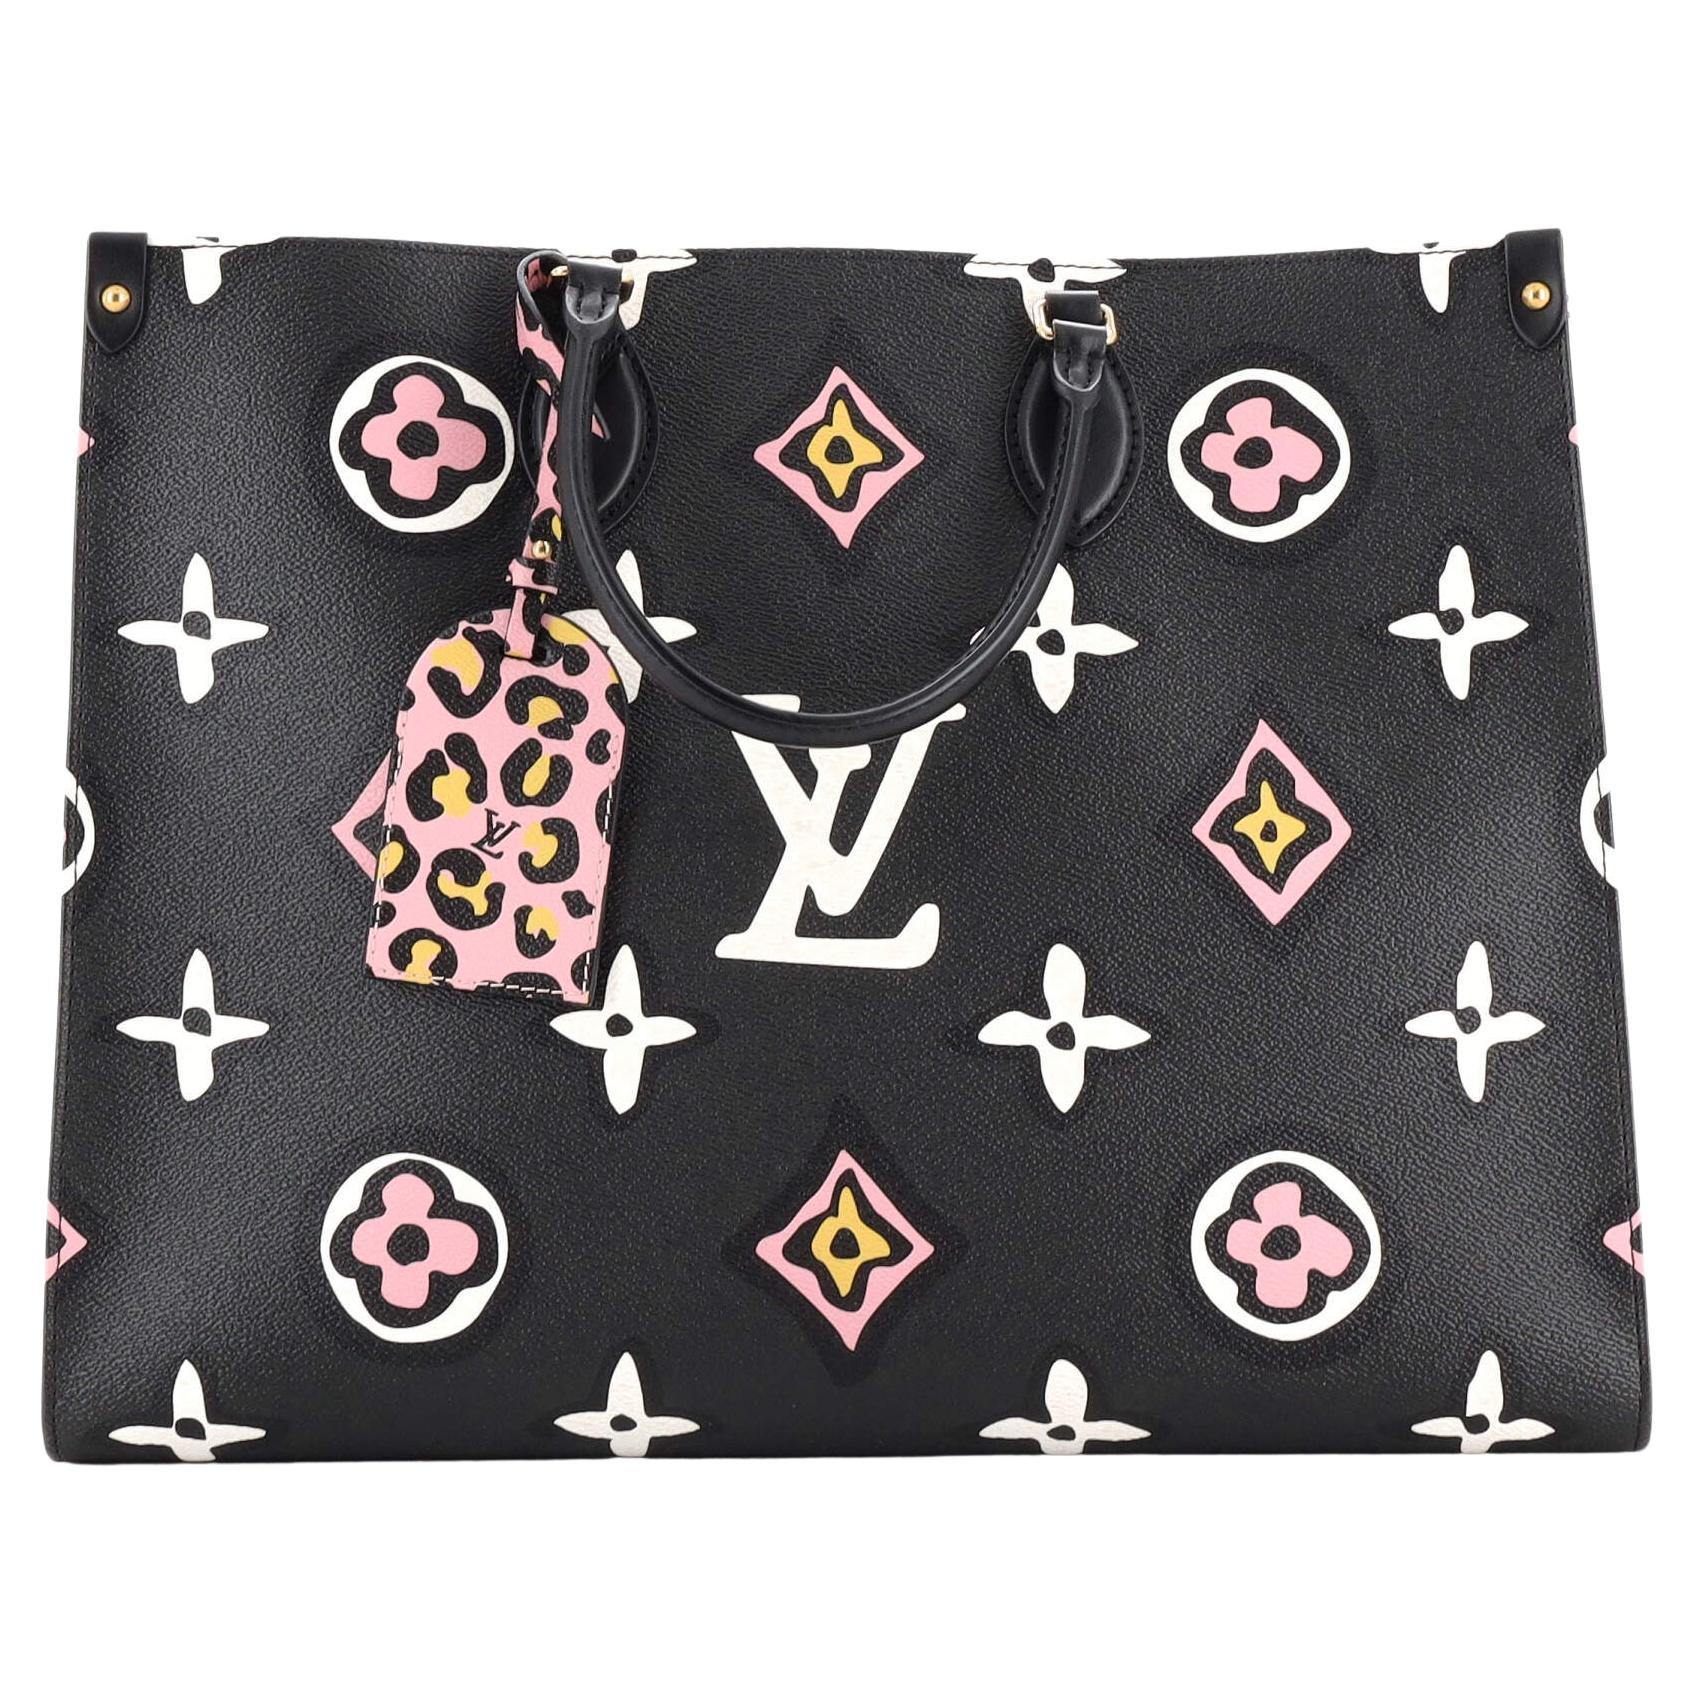 Louis Vuitton On The Go Wild At Heart Giant Monogram Leather GM